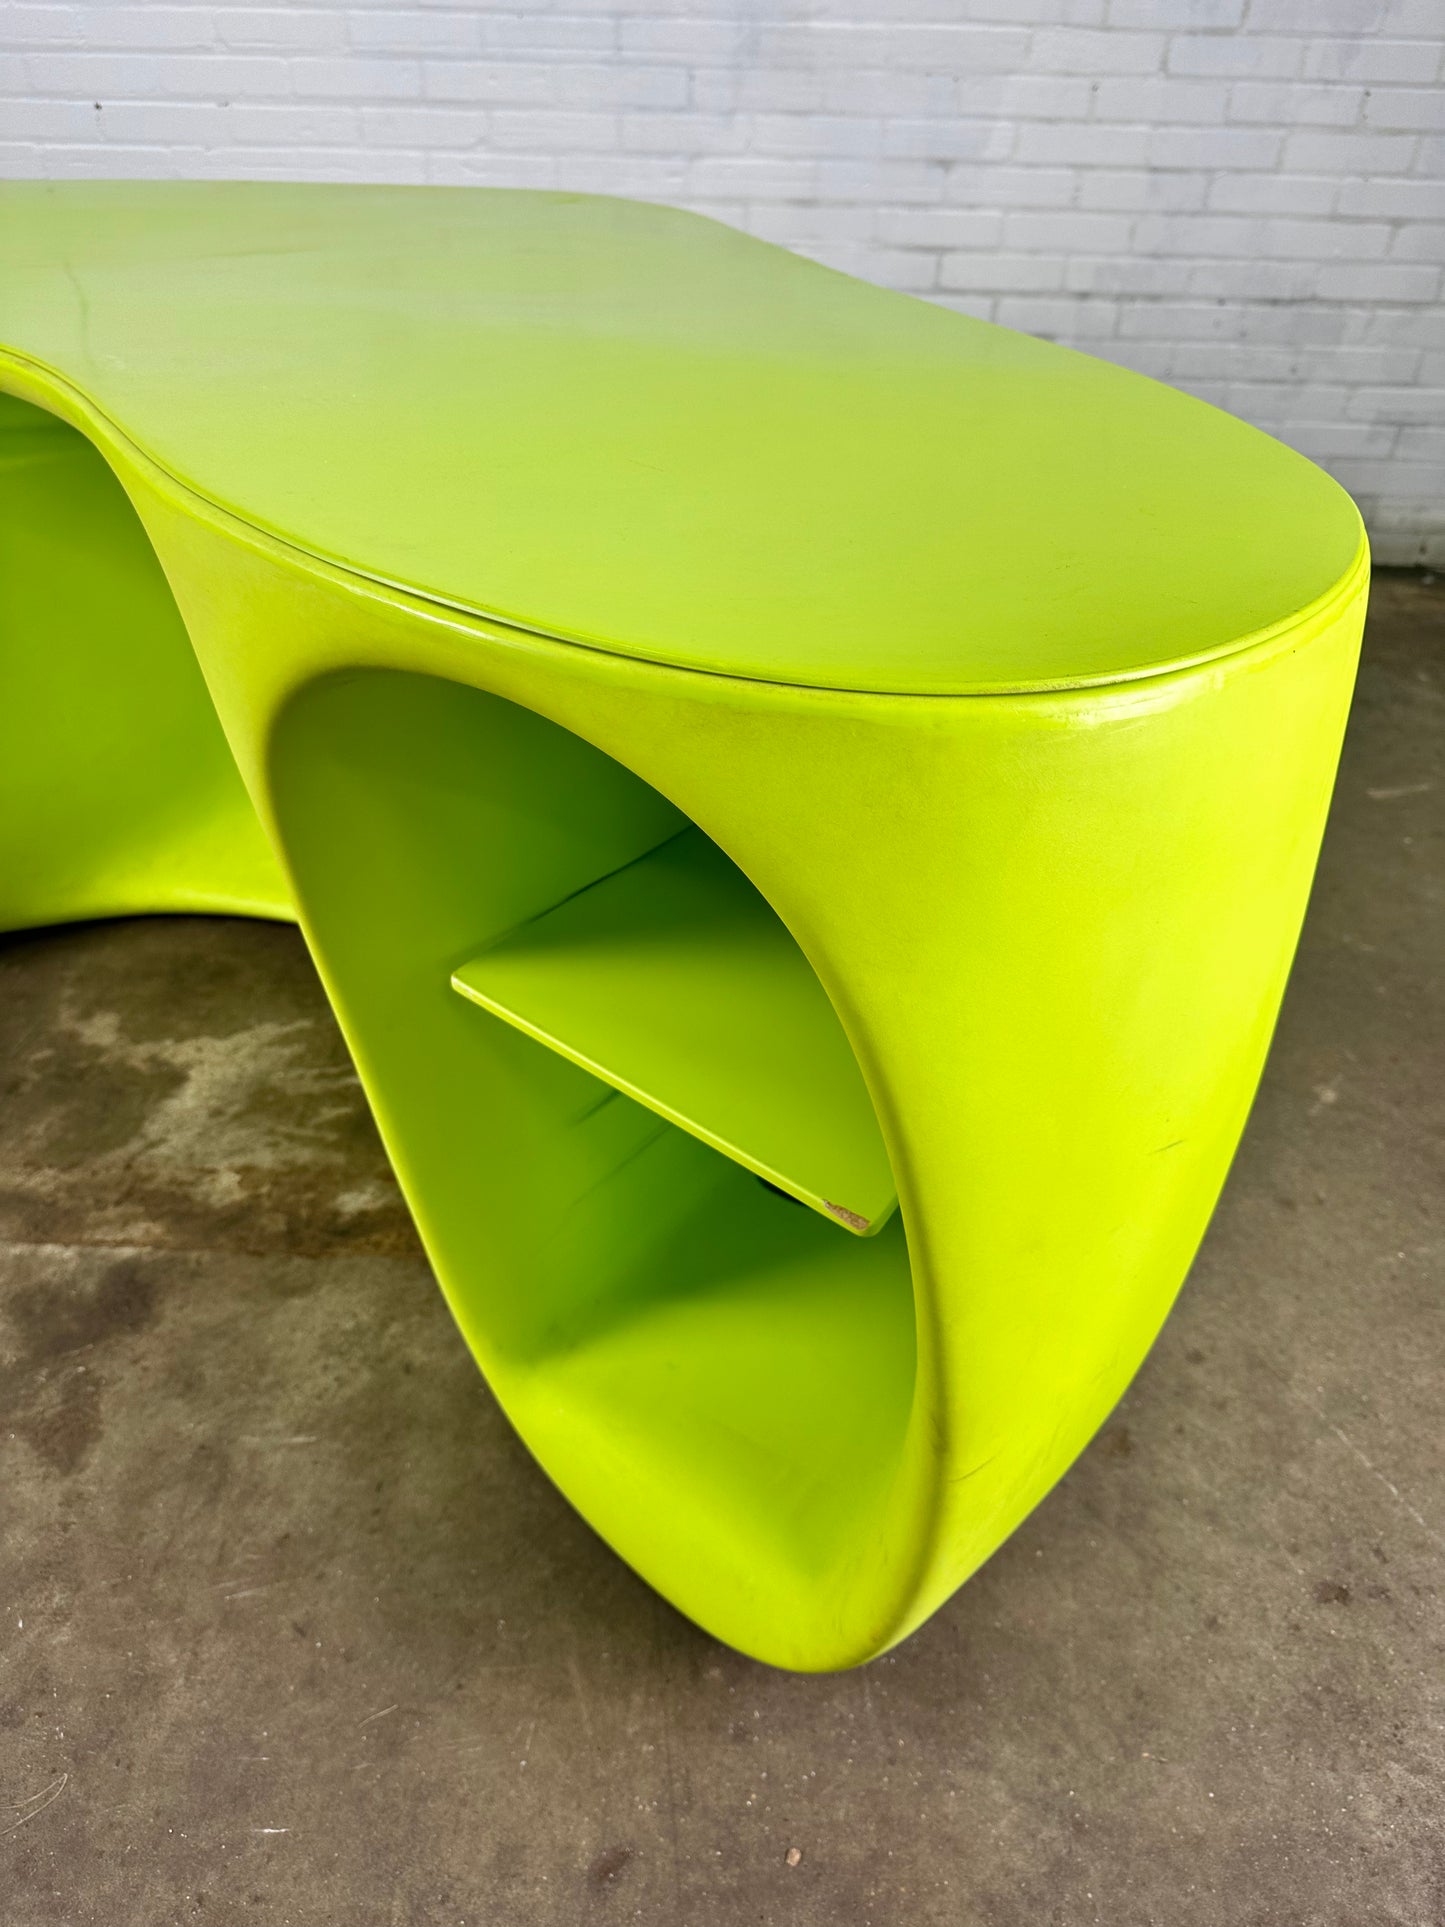 Vitra lime green Baobab desk by Philippe Starck